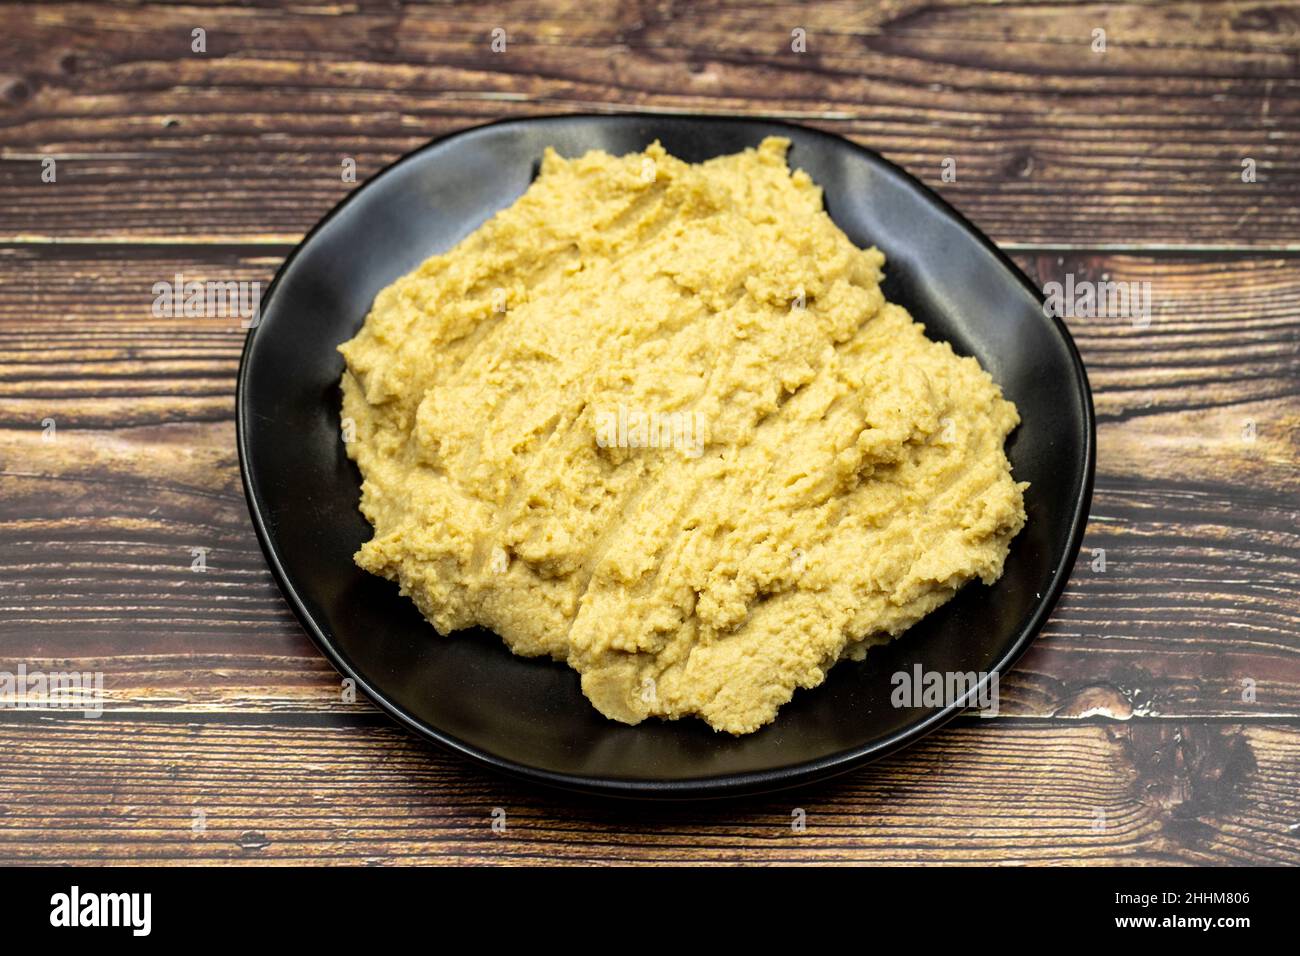 Hummus in a ceramic plate. Dishes of chickpeas, a vegetarian dish. Stock Photo